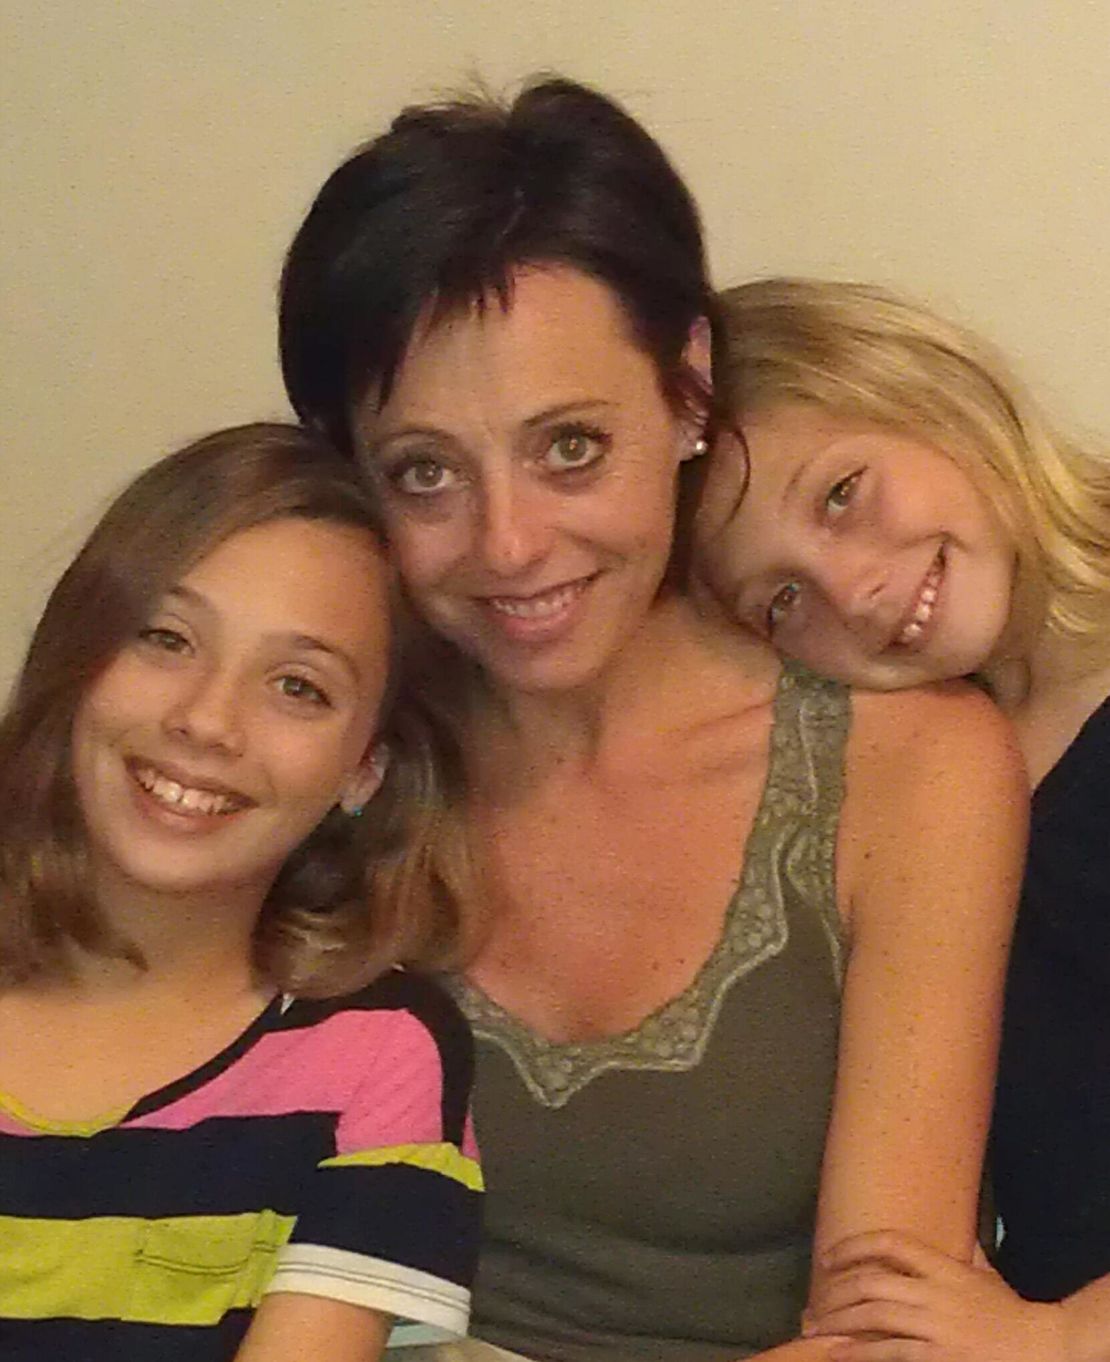 Vanessa Thiemann is a breast cancer survivor and single mother to two girls.